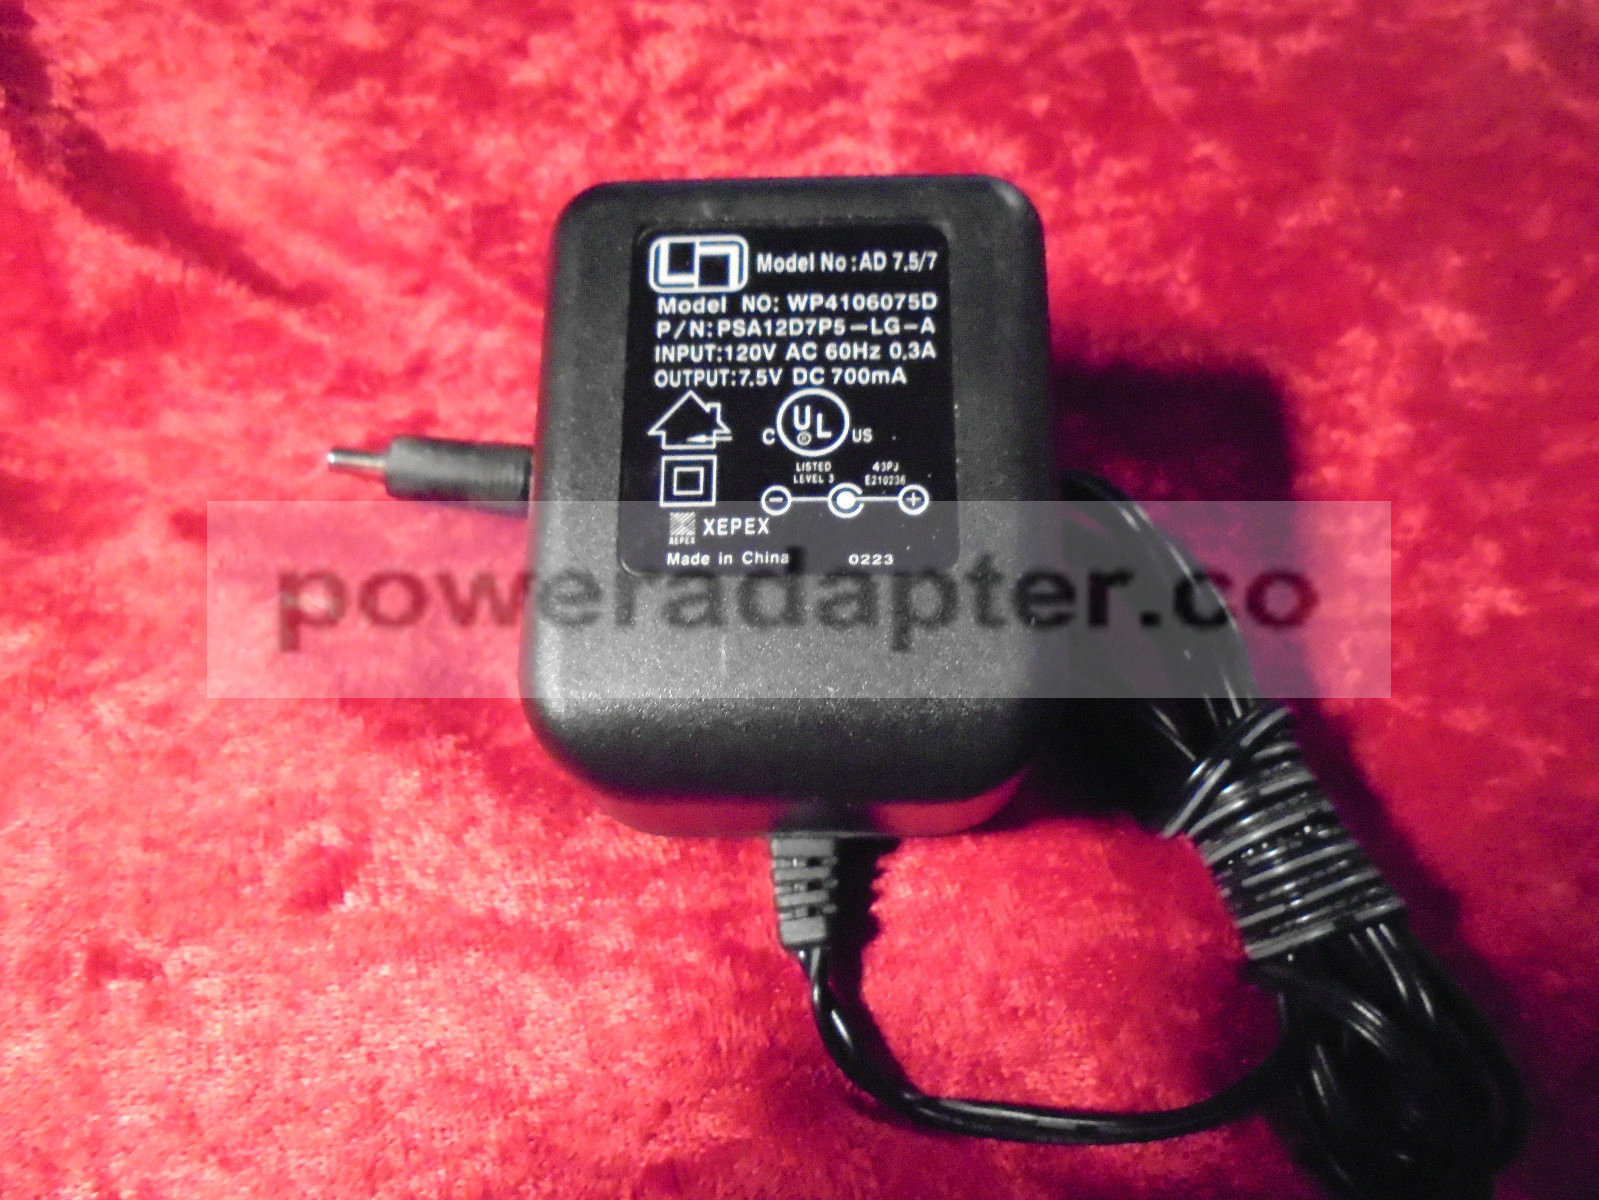 Xepex WP4106075D AD 7.5/7 AC Adapter 7.5VDC 700mA PSA12D7P5-LG-A Condition: Used: An item that has been used previo